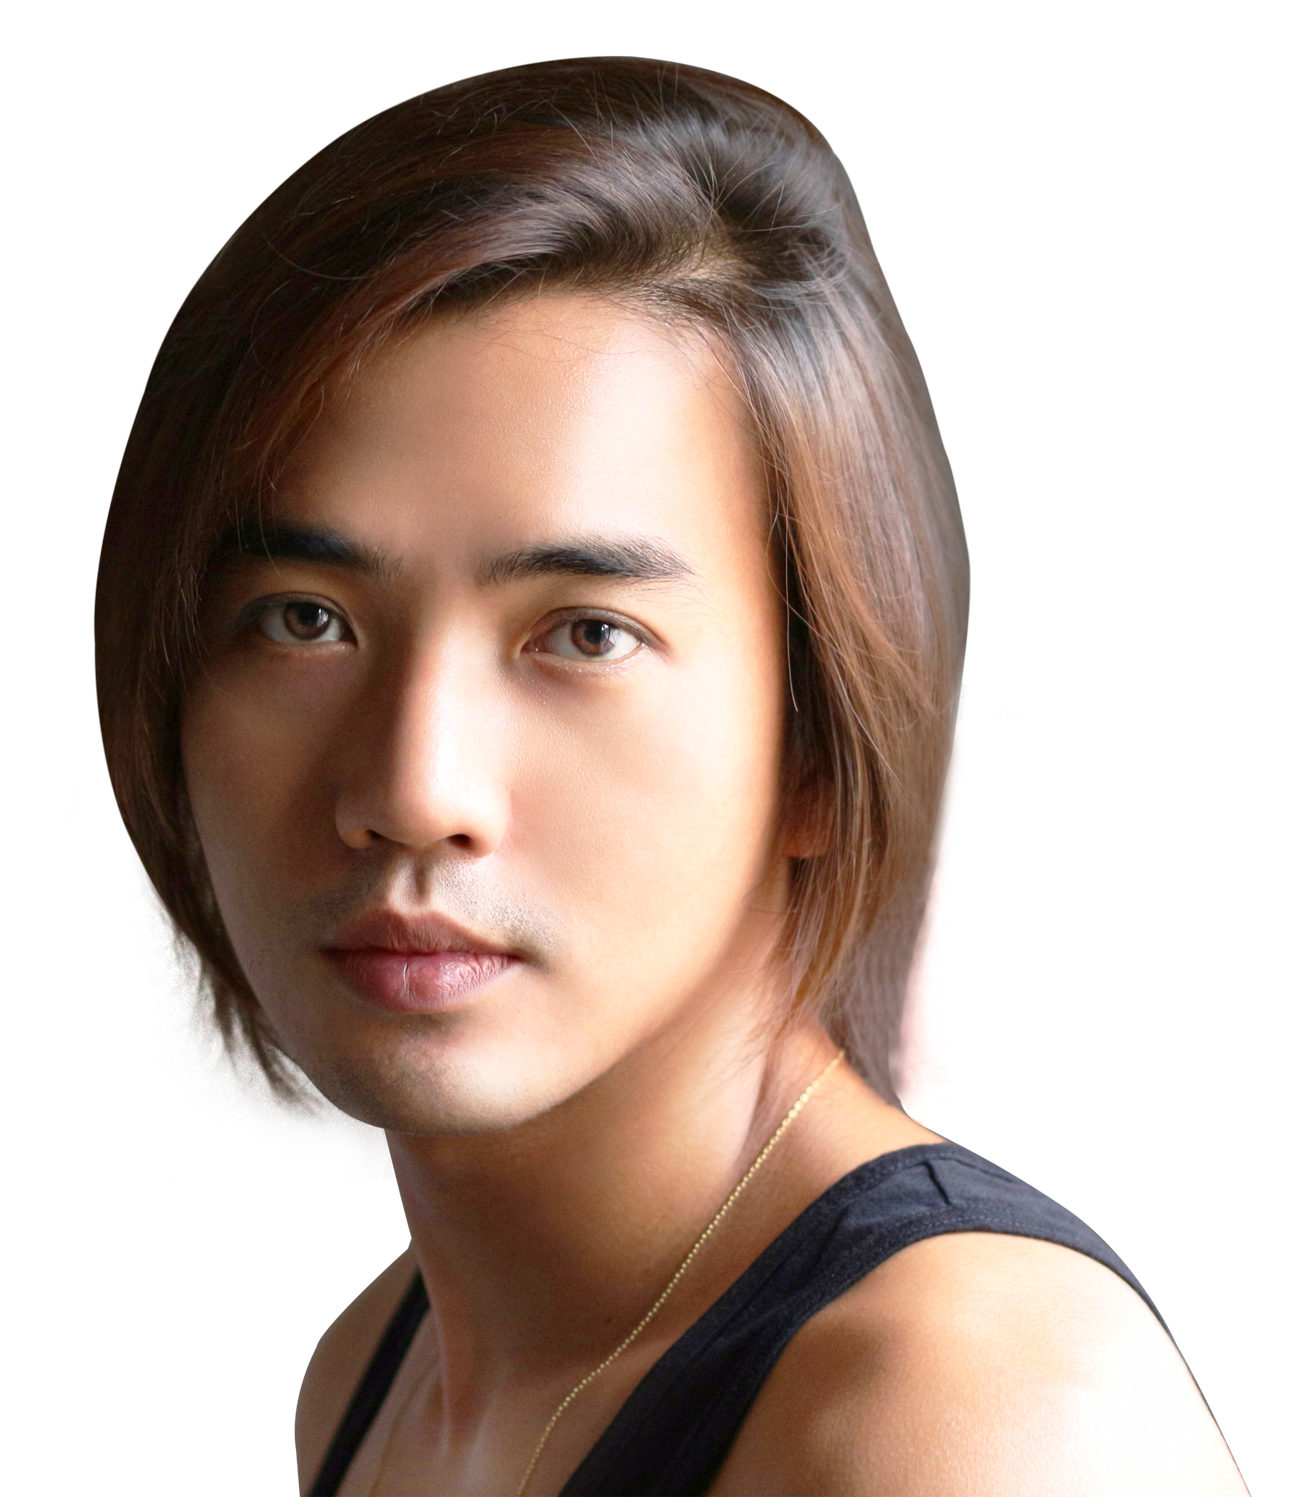 A Man With Long Hair Wearing A Black Tank Top